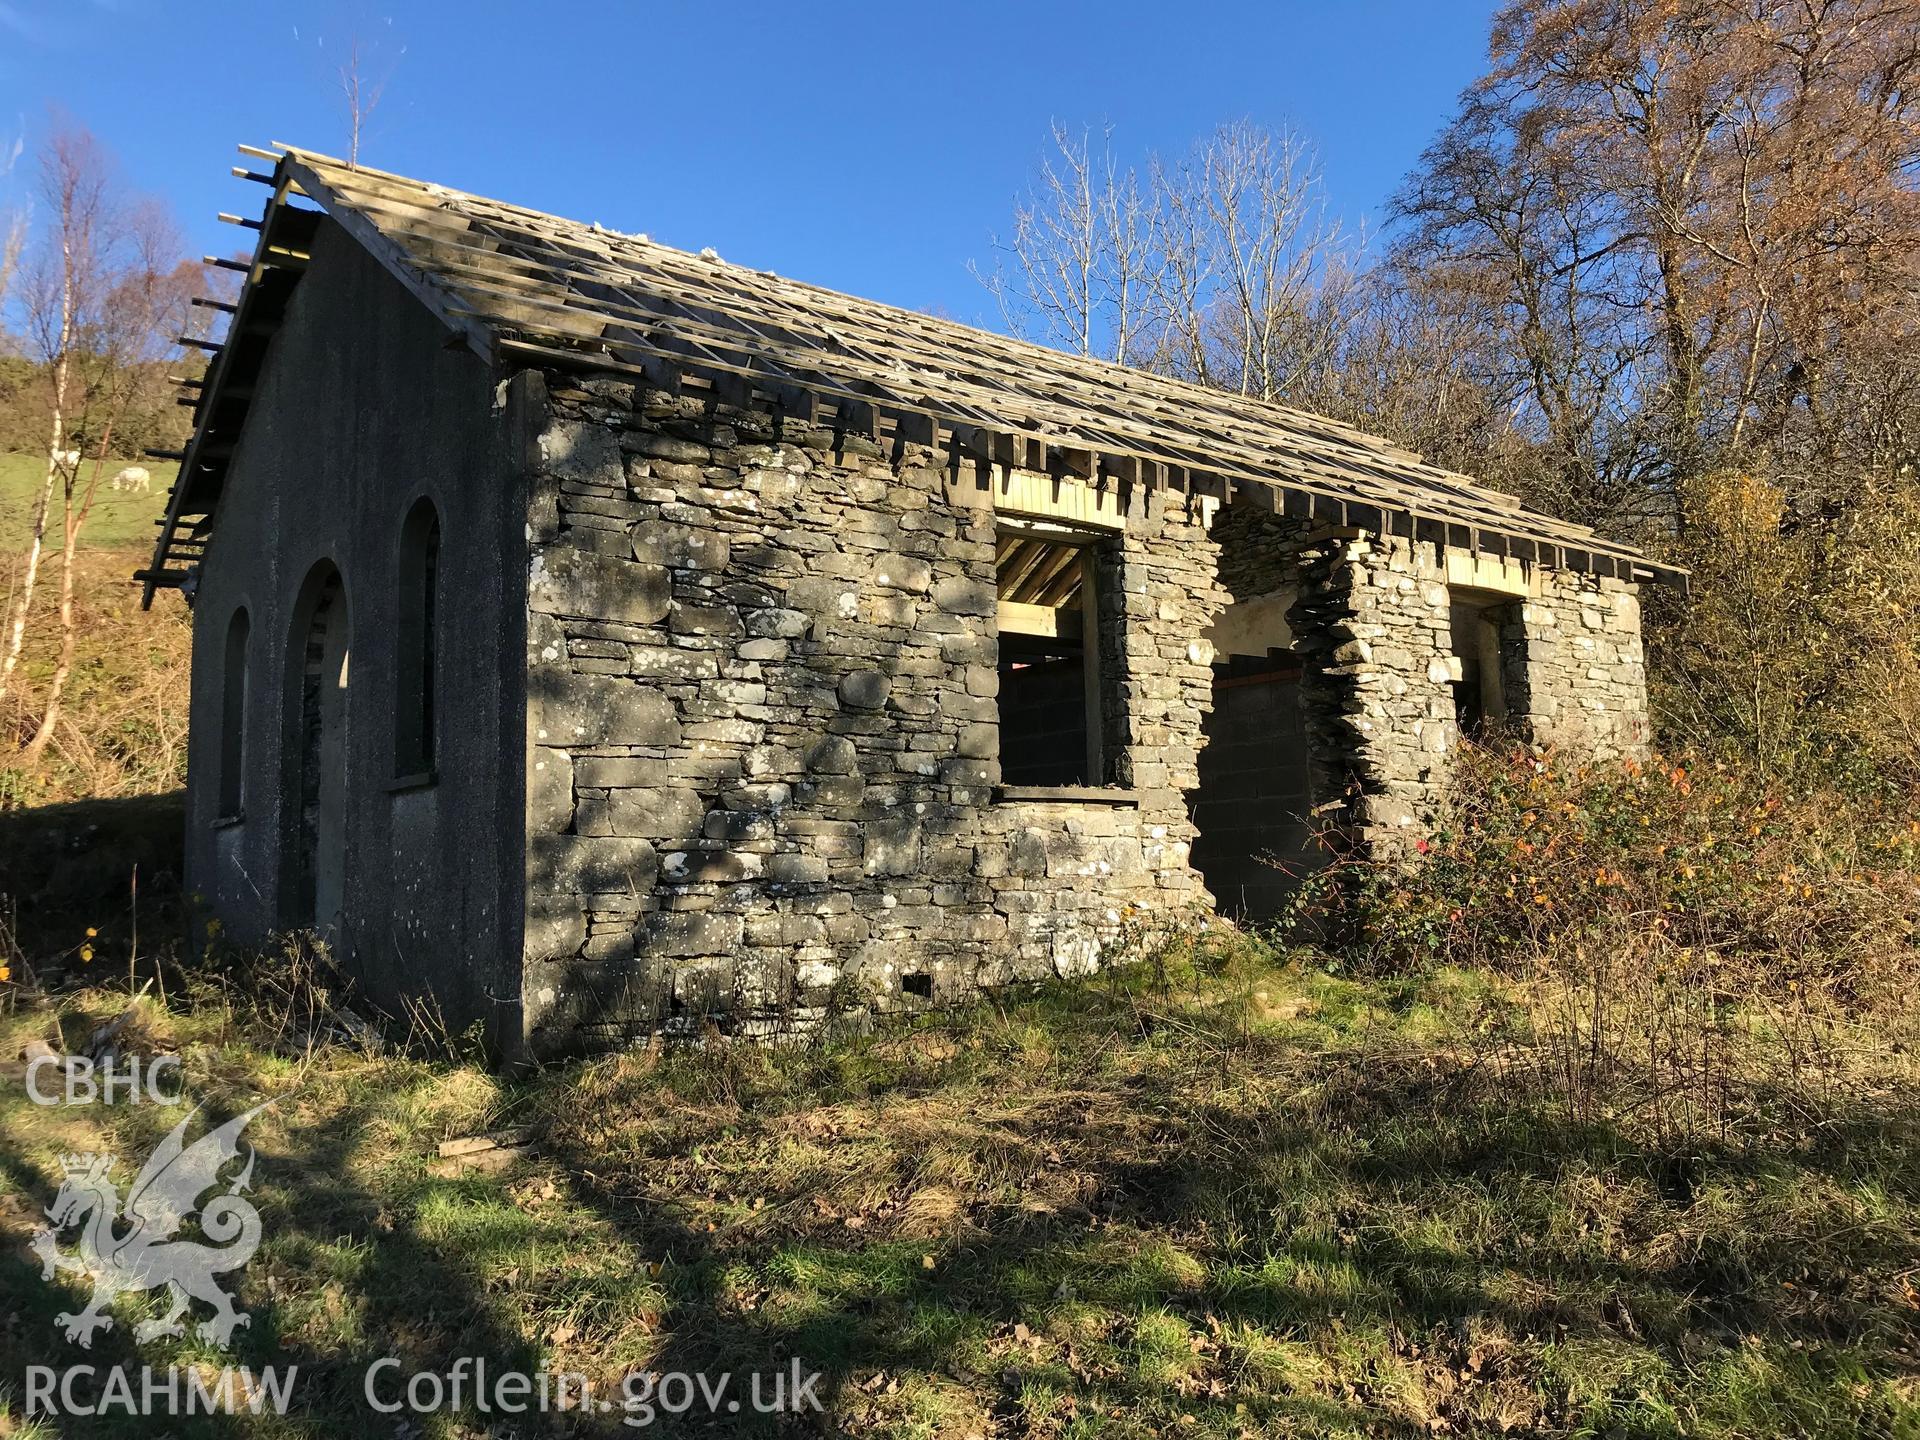 View from the south west of the front and side elevation of Glan-yr-Afon Calvinistic Methodist schoolroom, Tregaron. Colour photograph taken by Paul R. Davis on 18th November 2018.